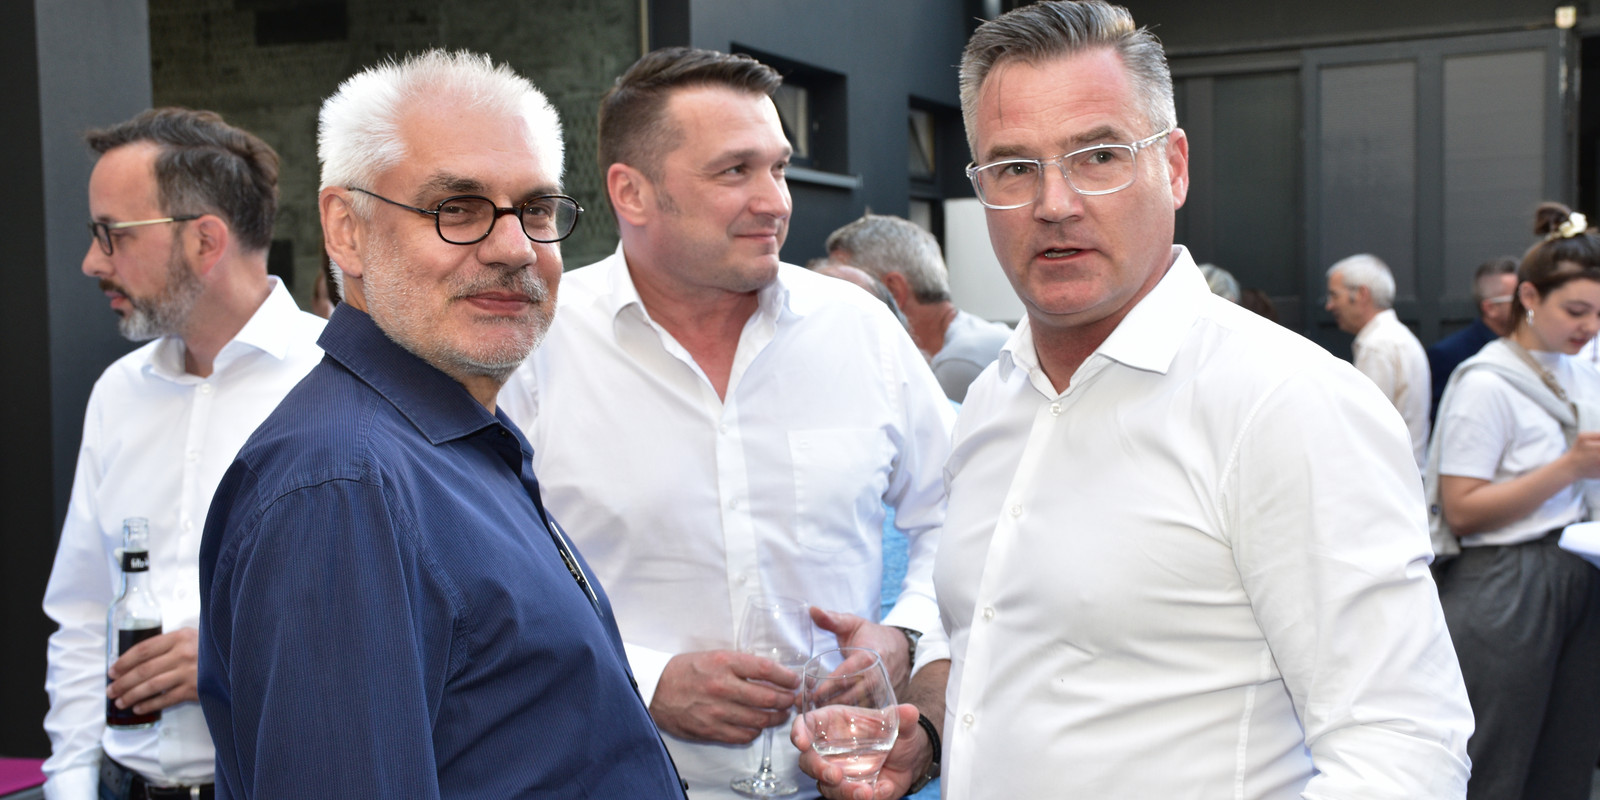 190627_Reopening_Party_Hannover Bild 4